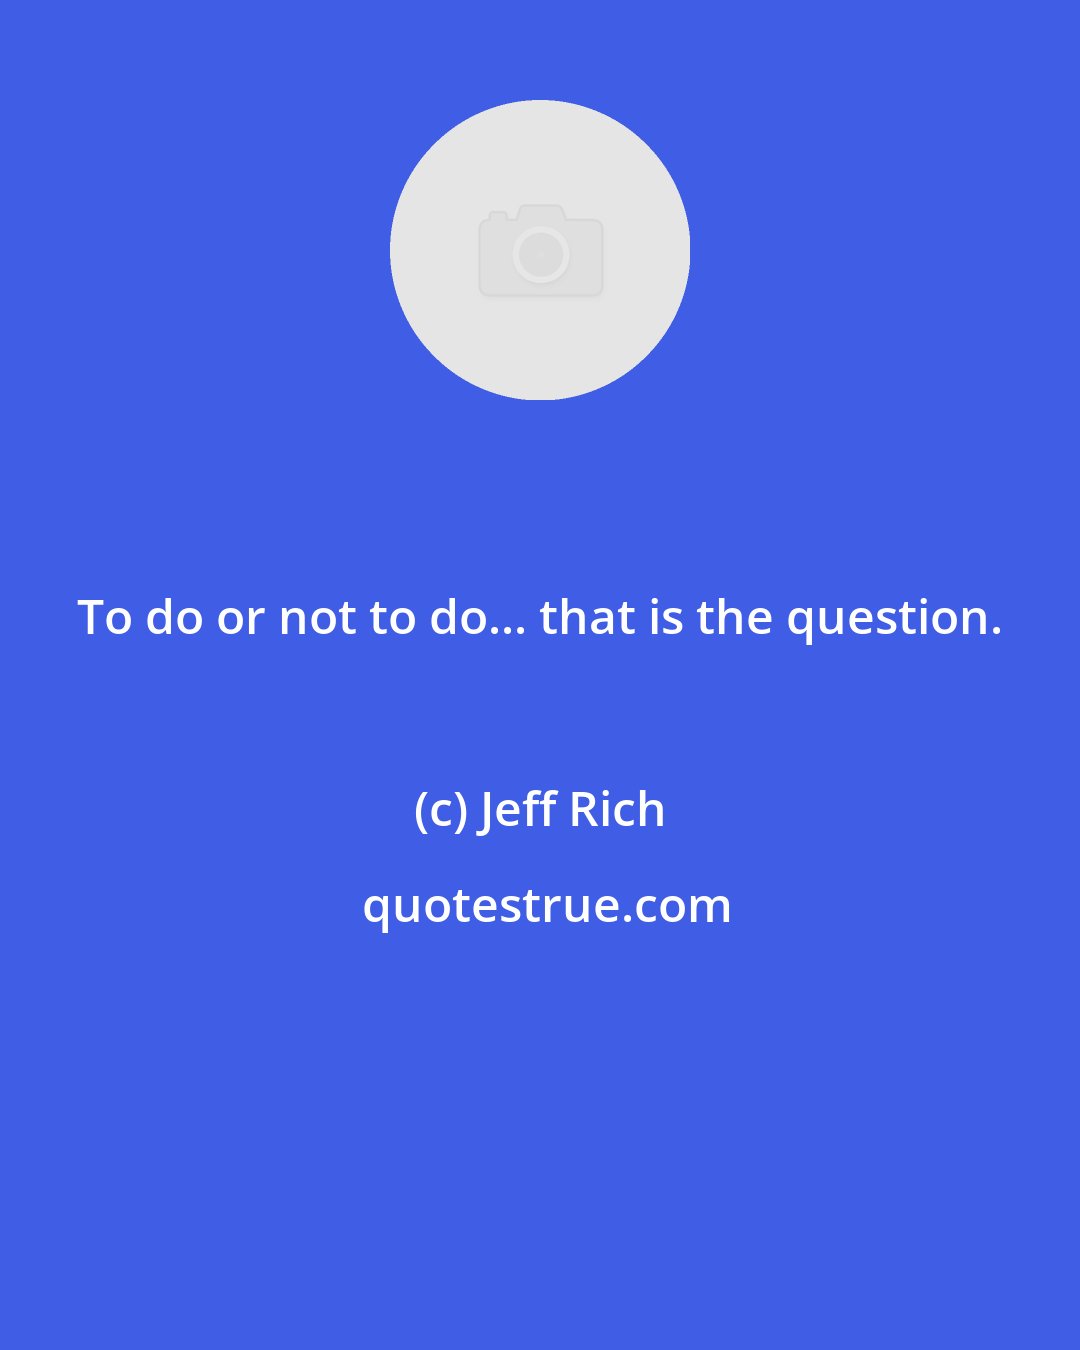 Jeff Rich: To do or not to do... that is the question.